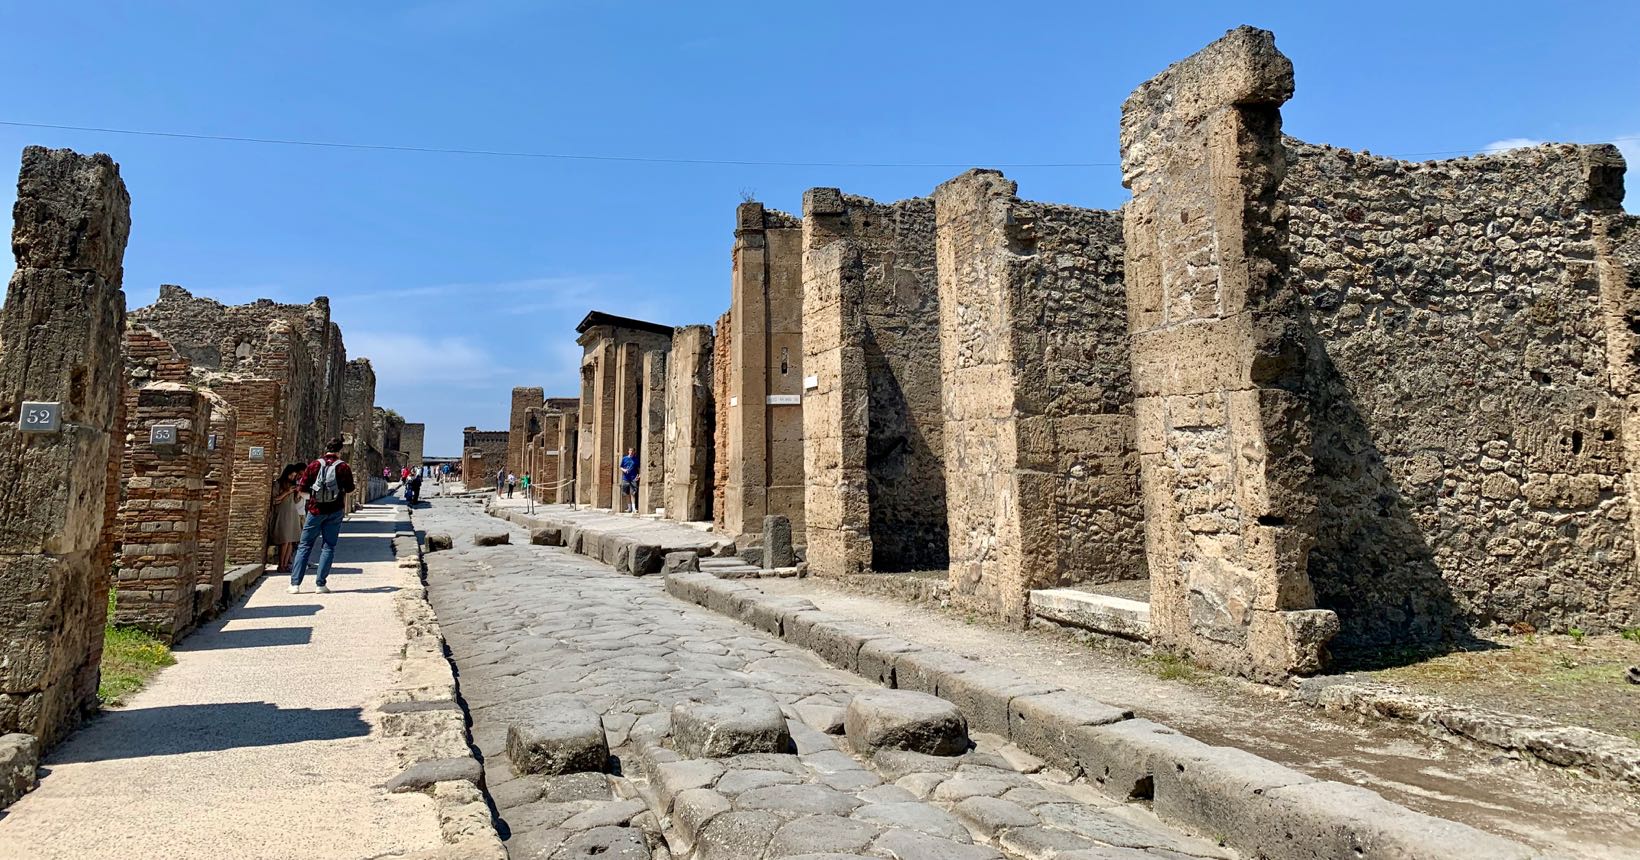 discover this incredible Roman city in Italy!